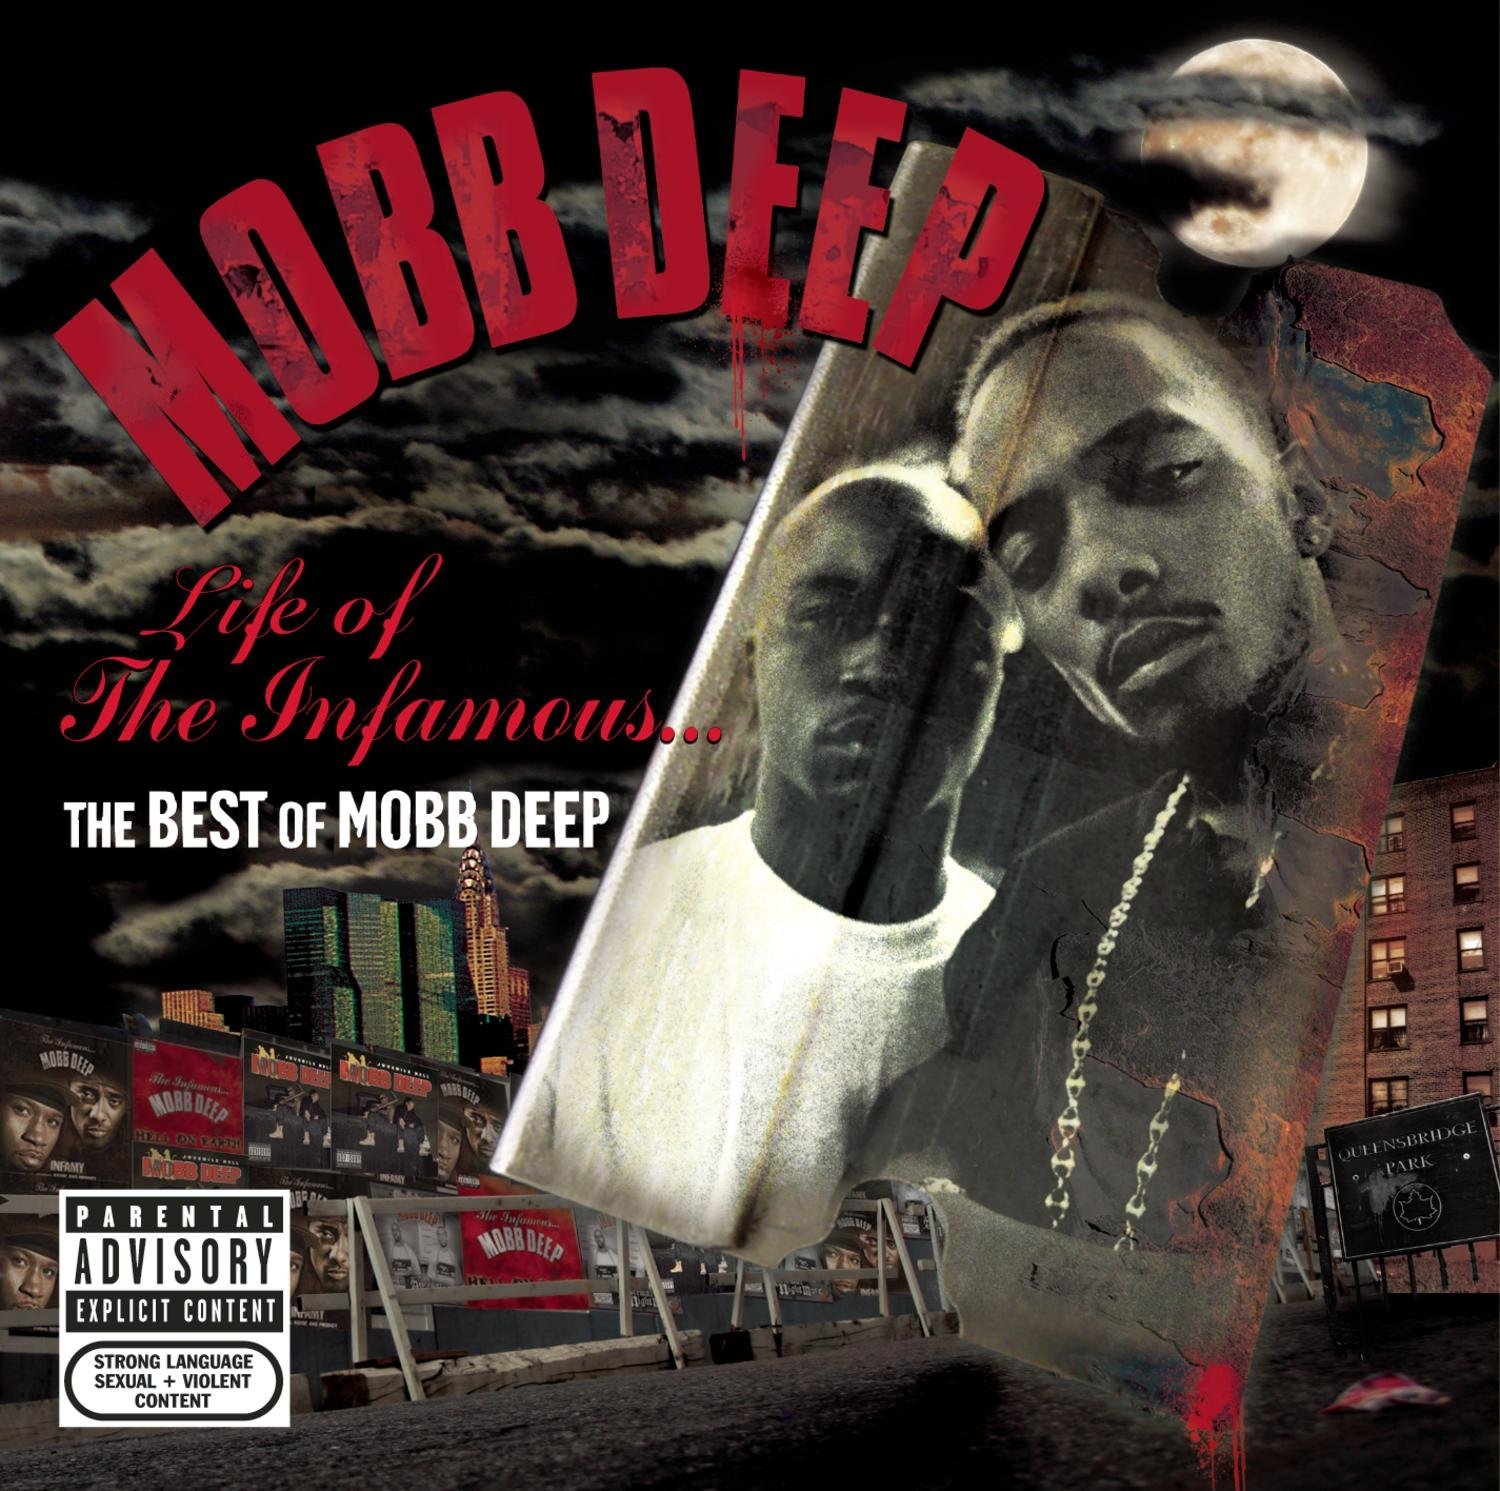 Life Of The Infamous - The Best Of Mobb Deep | Mobb Deep image7